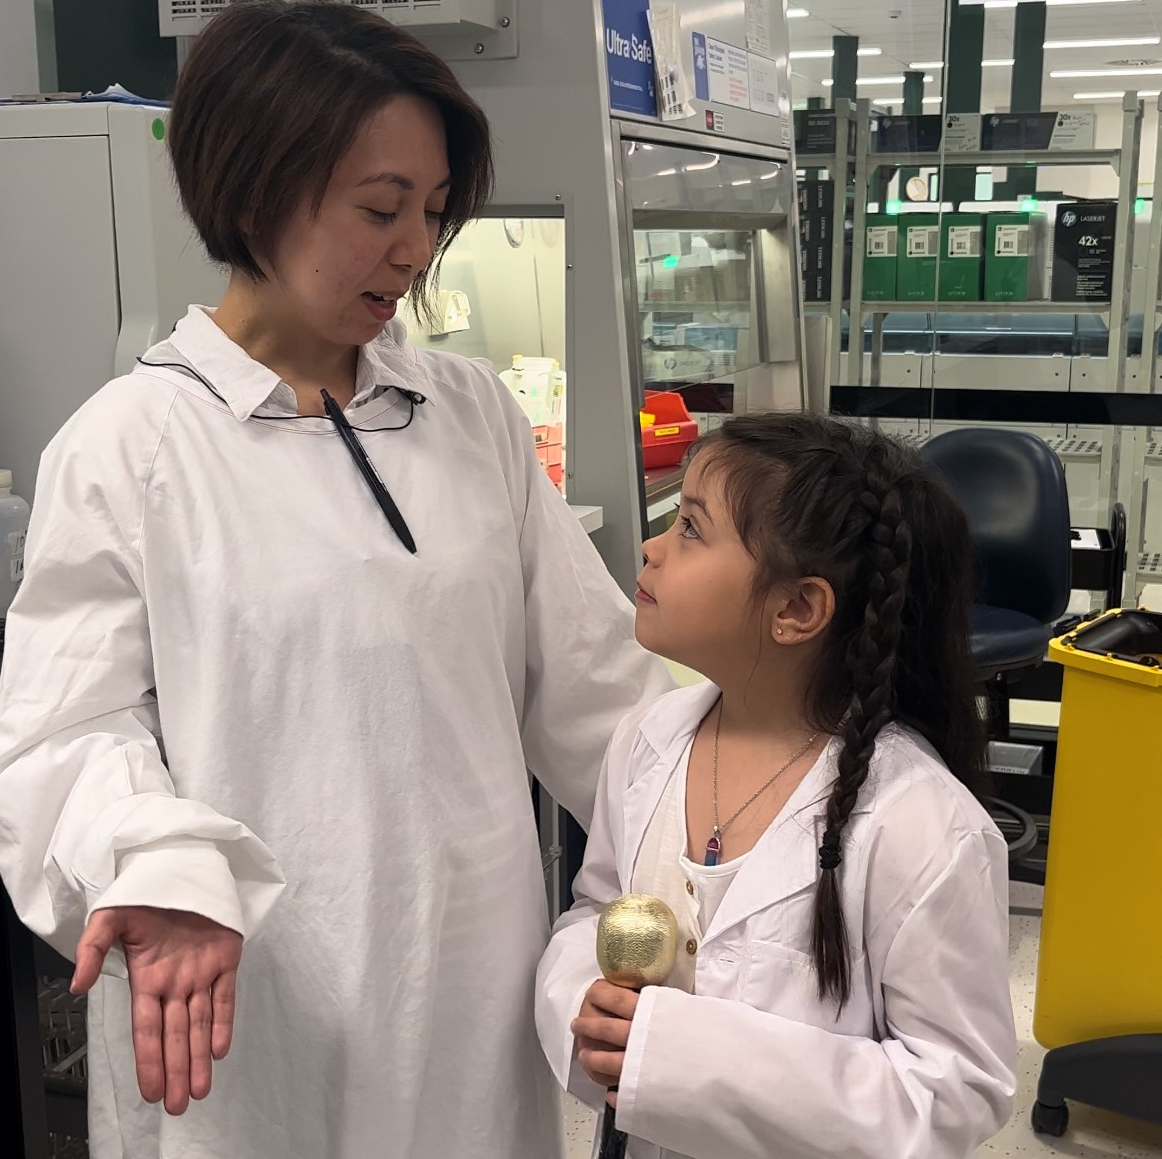 A woman in a white lab coat stands next to a young girl in a lab coat holding a microphone.